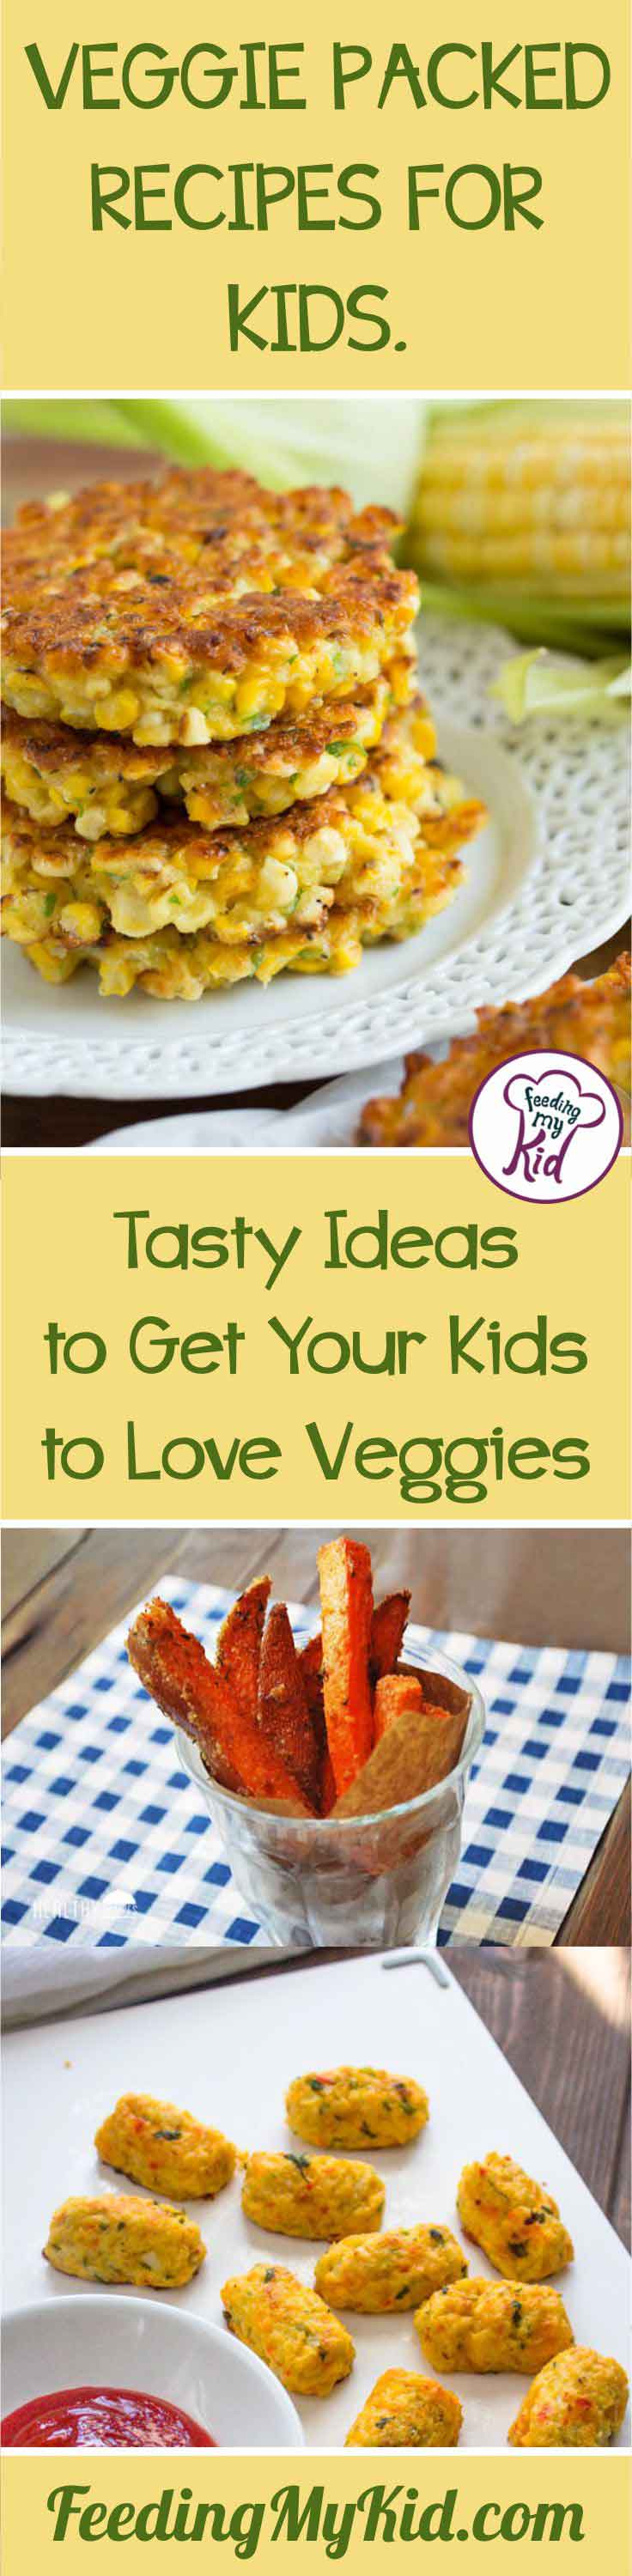 These vegetarian recipes for kids are super flavorful. They make great side dishes for a host of dinners. Your kids might fall in love with veggies!